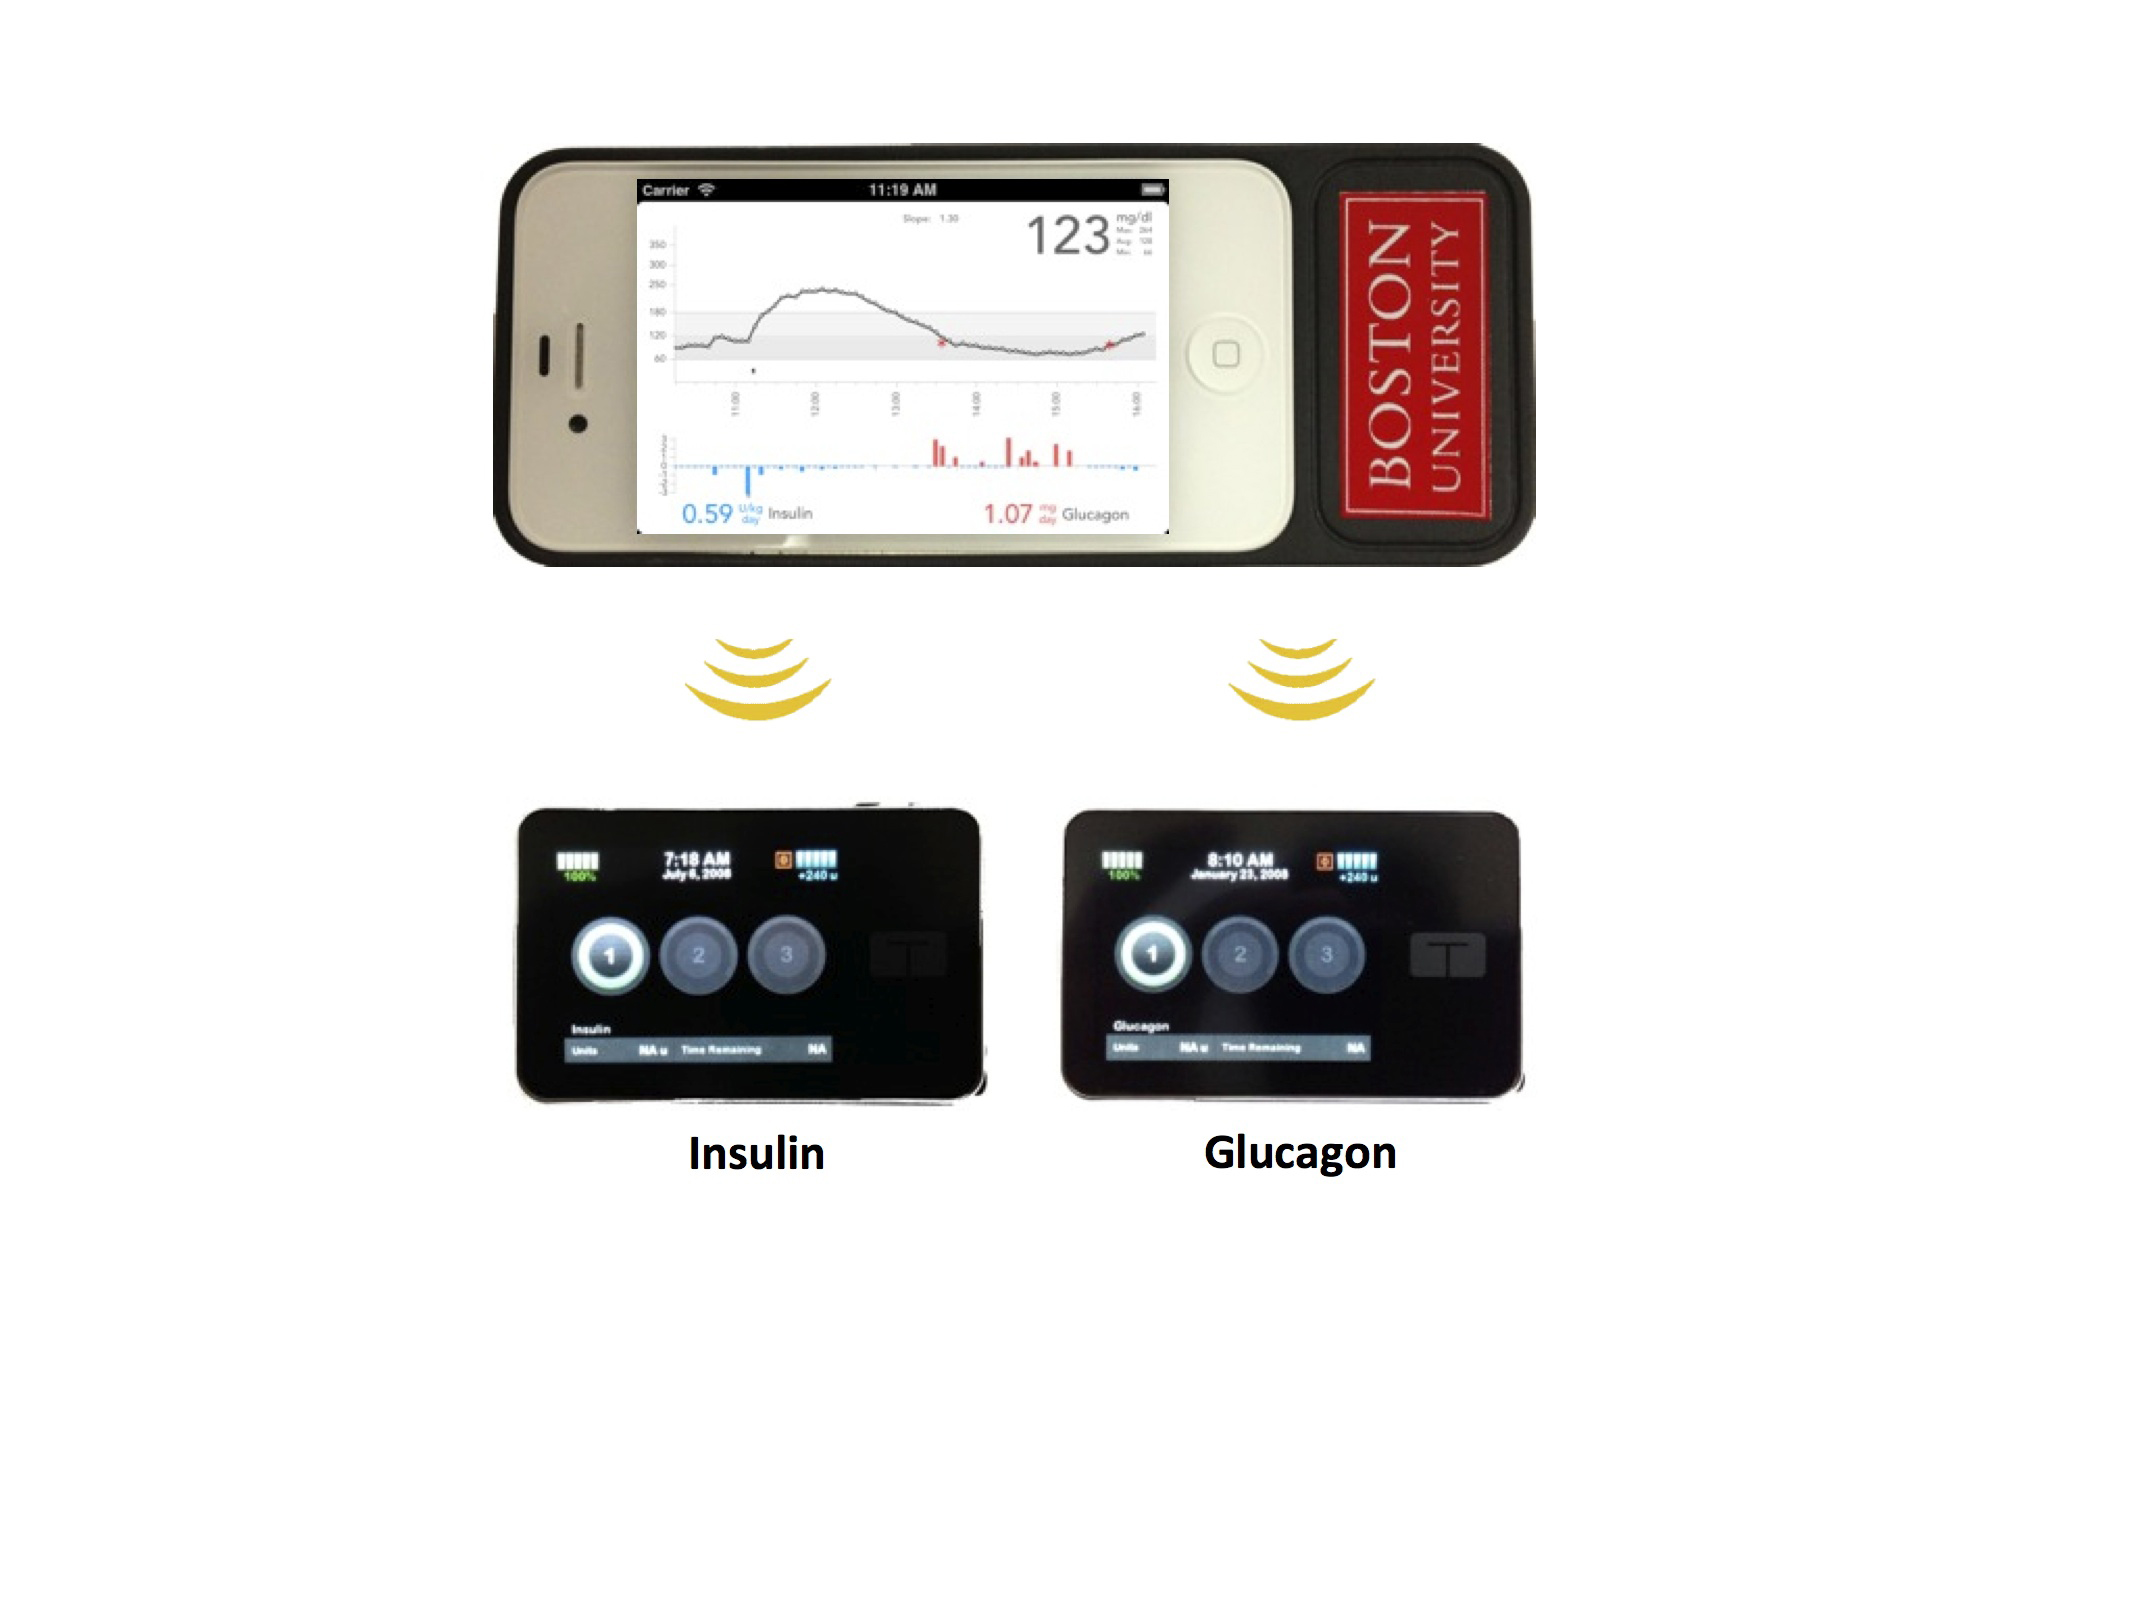 The bionic pancreas consists of a smartphone, top, hardwired to a continuous glucose monitor and two pumps, bottom, that pumps deliver doses of insulin or glucagon every five minutes.